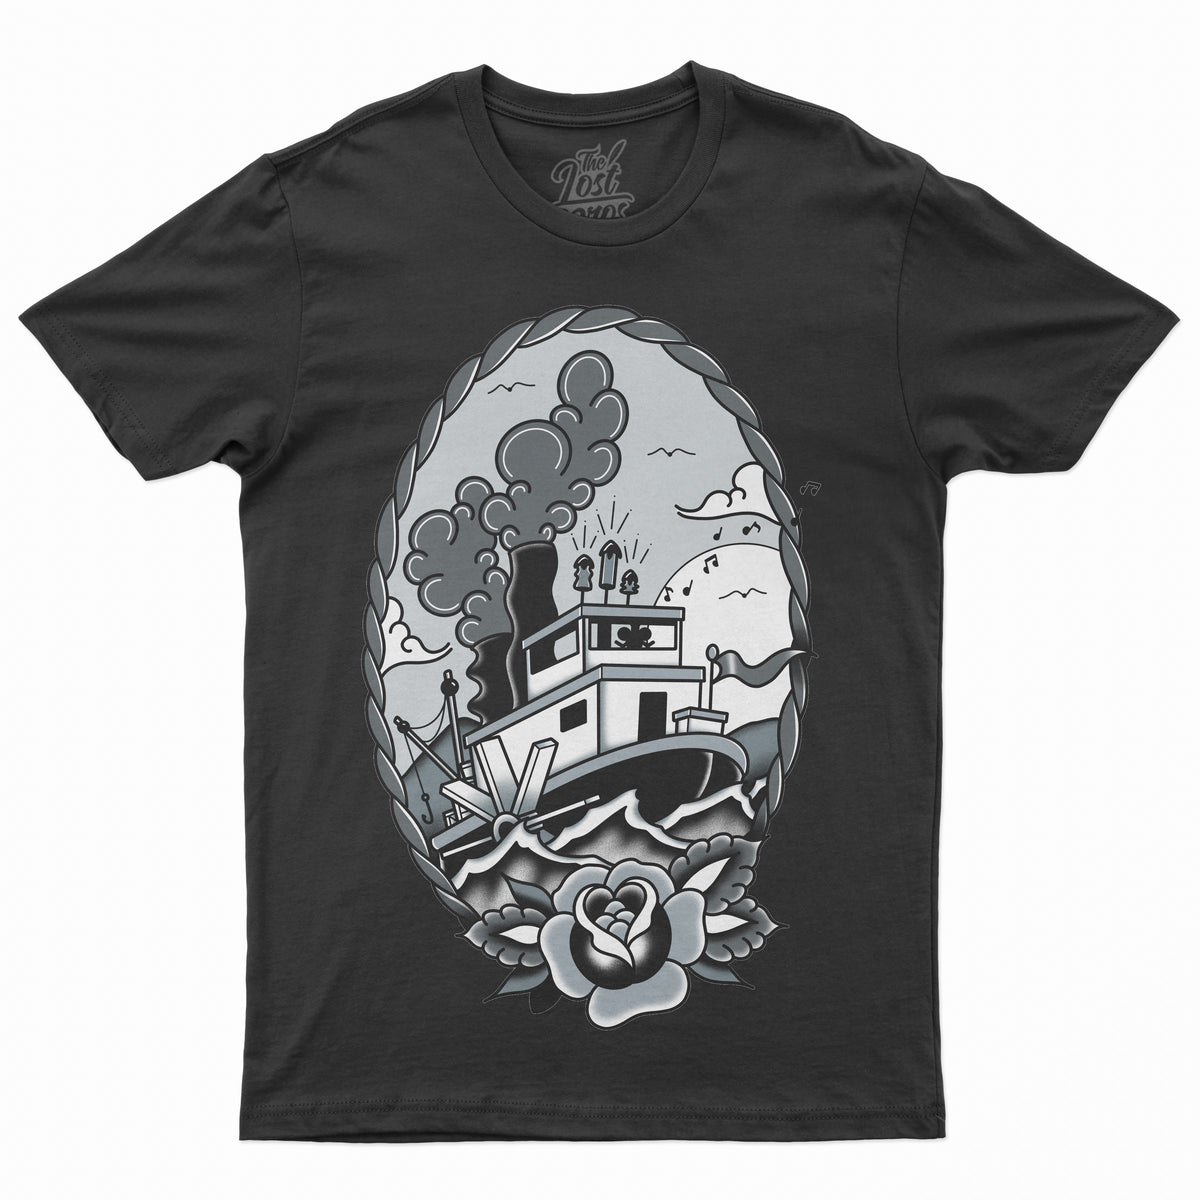 The Lost Bros Steamboat Tattoo Tee